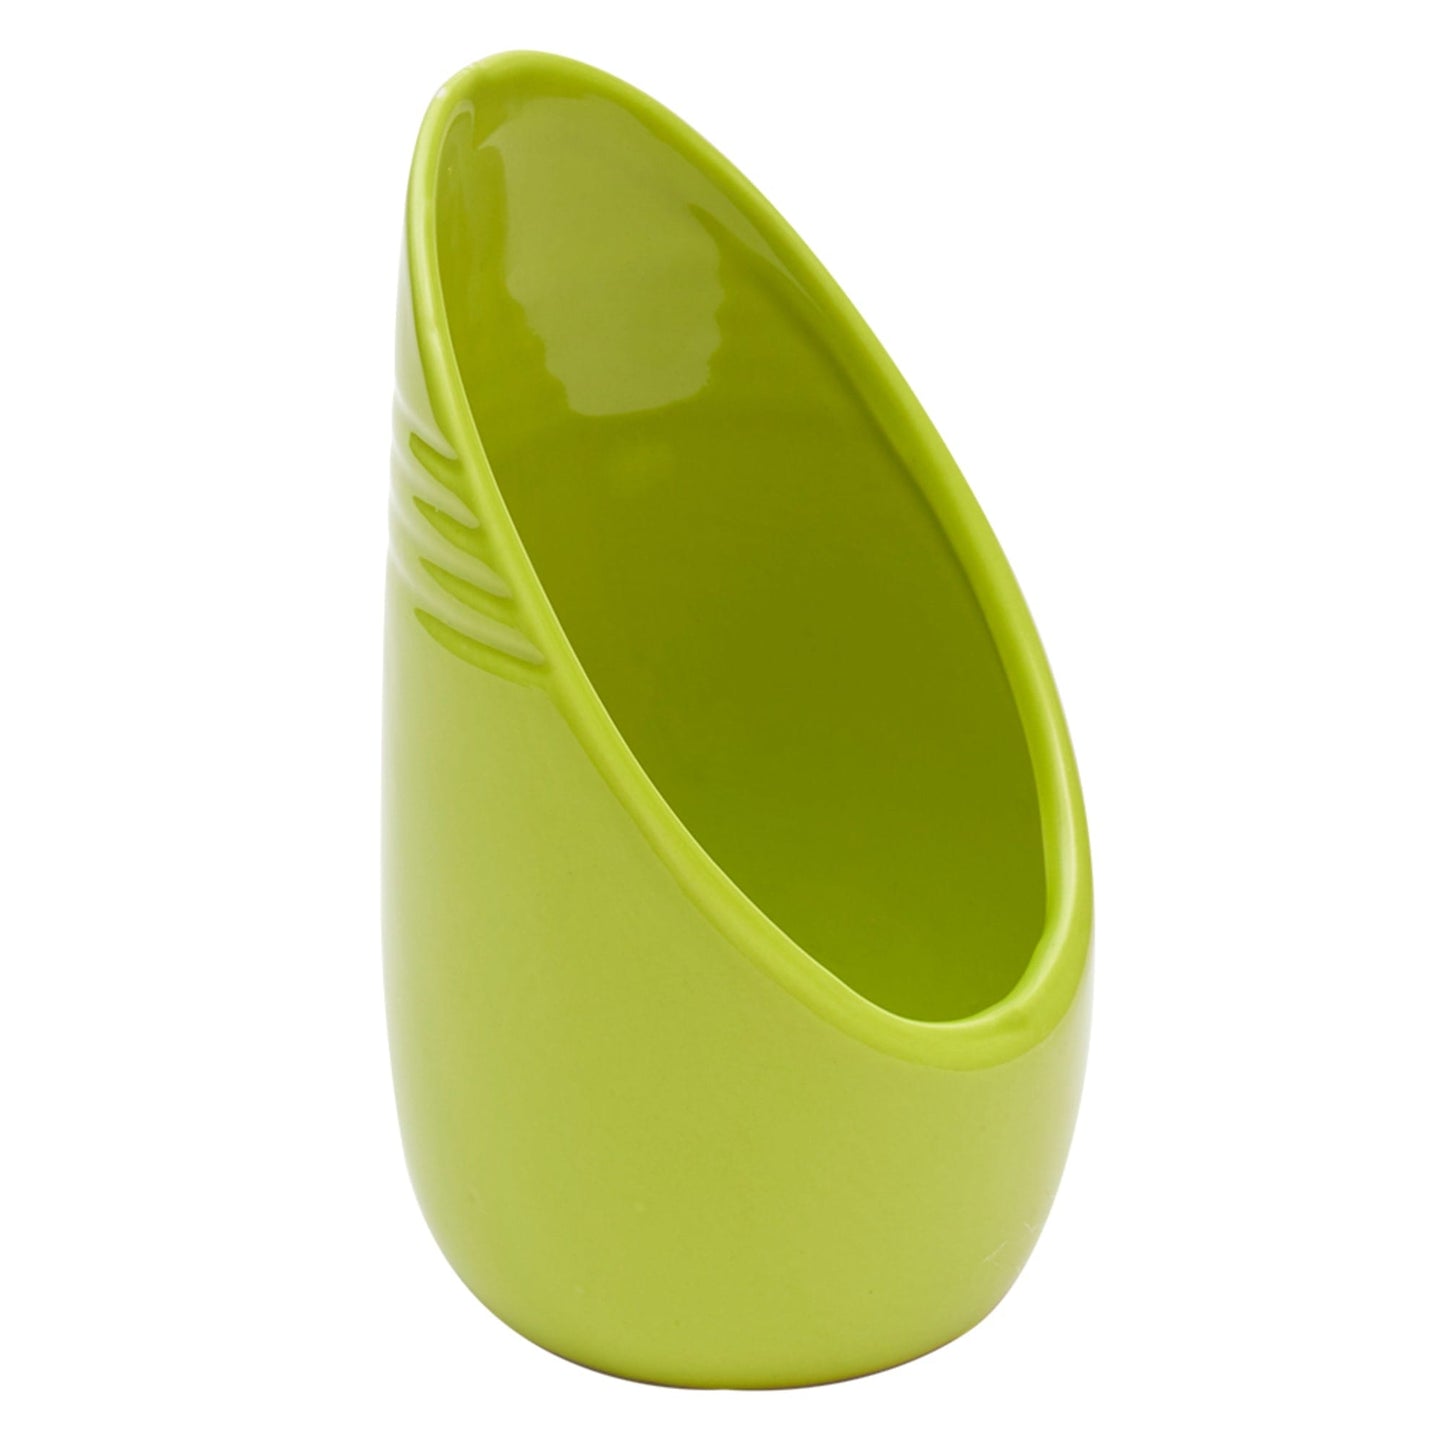 Stand Up Ceramic Spoon Rest, Lime Green